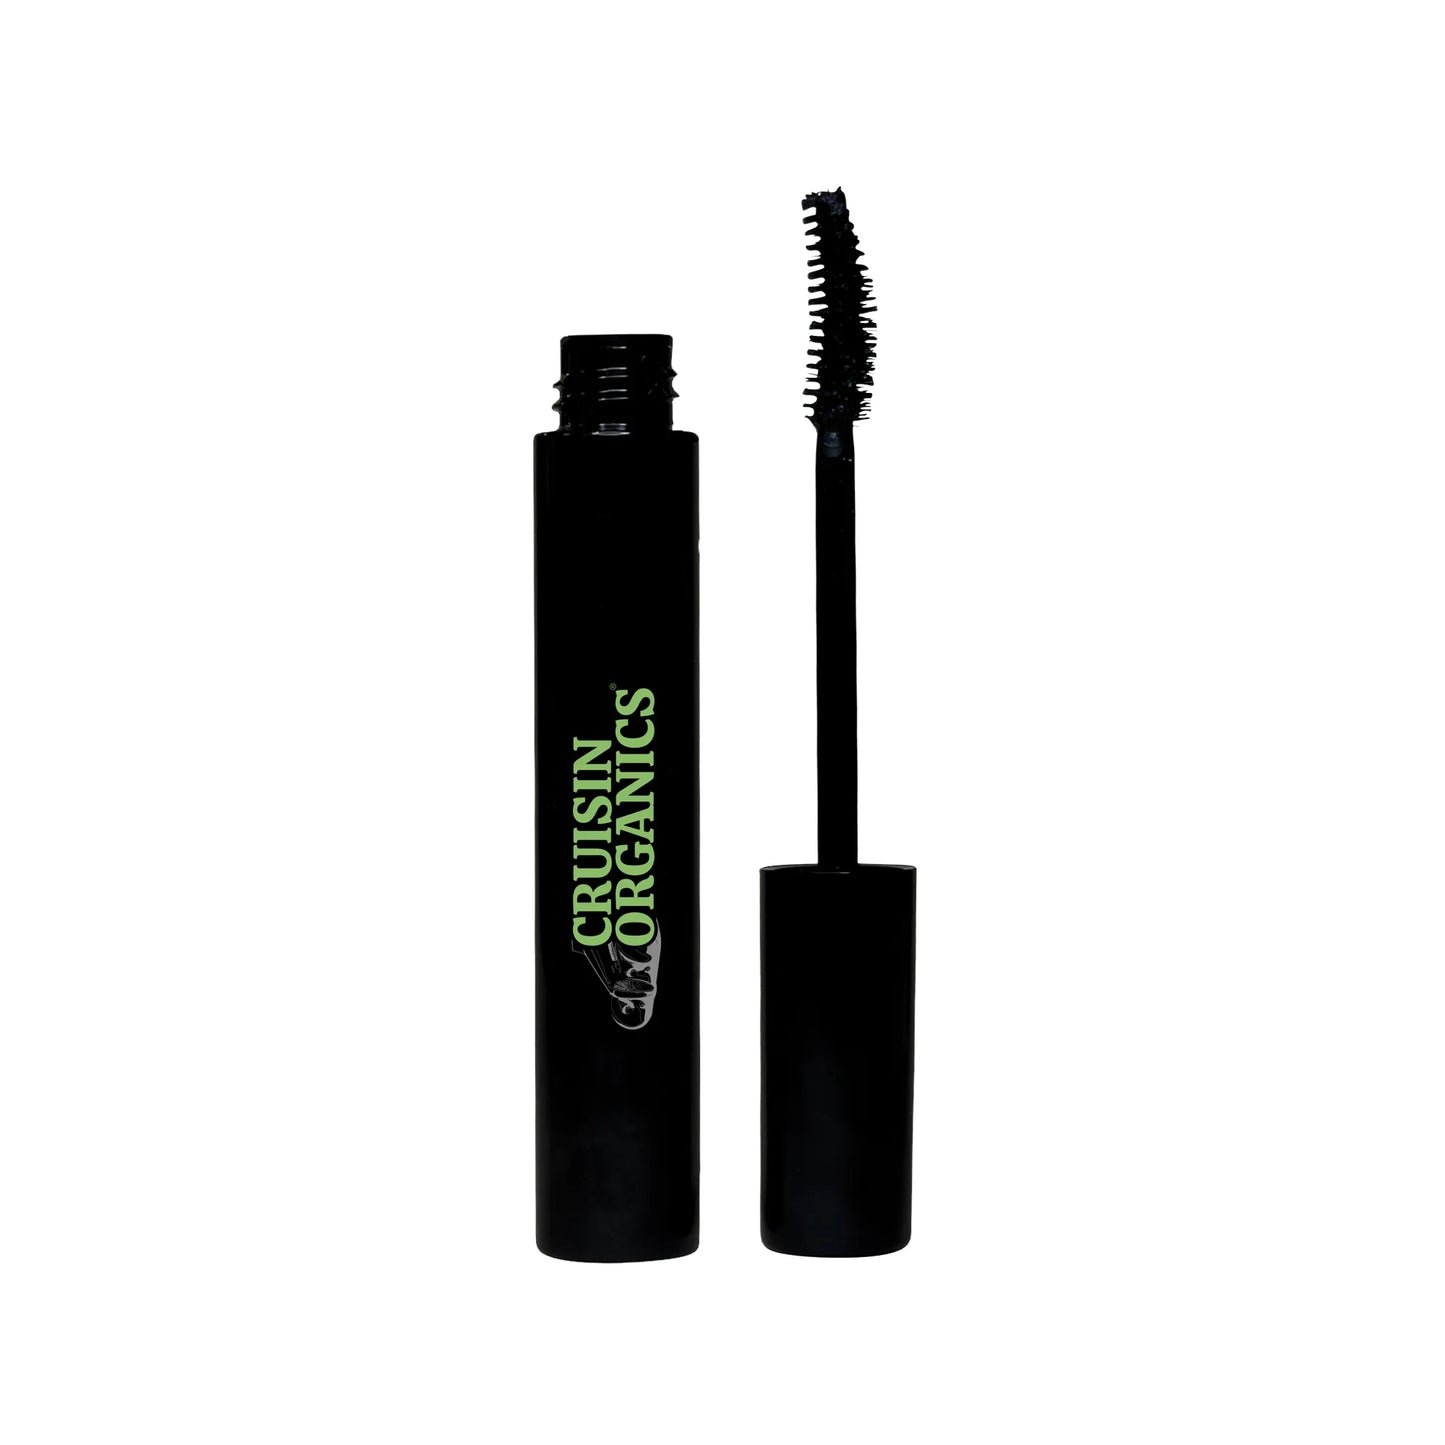 Cruisin Organics Luxury Mascara, Black  4-in-1 Luxury Mascara masterpiece that curls, volumizes, lengthens, and sets lashes in place, ensuring all-day wear. The ergonomically curved brush is designed to perfectly follow the eye's contour, meticulously coating each lash individually to achieve maximum volume and depth. The secret behind this innovative mascara lies in hydrolyzed keratin, which works to repair and fortify the bonds of your lash hair. Experience heightened essence of drama with just one sweep.